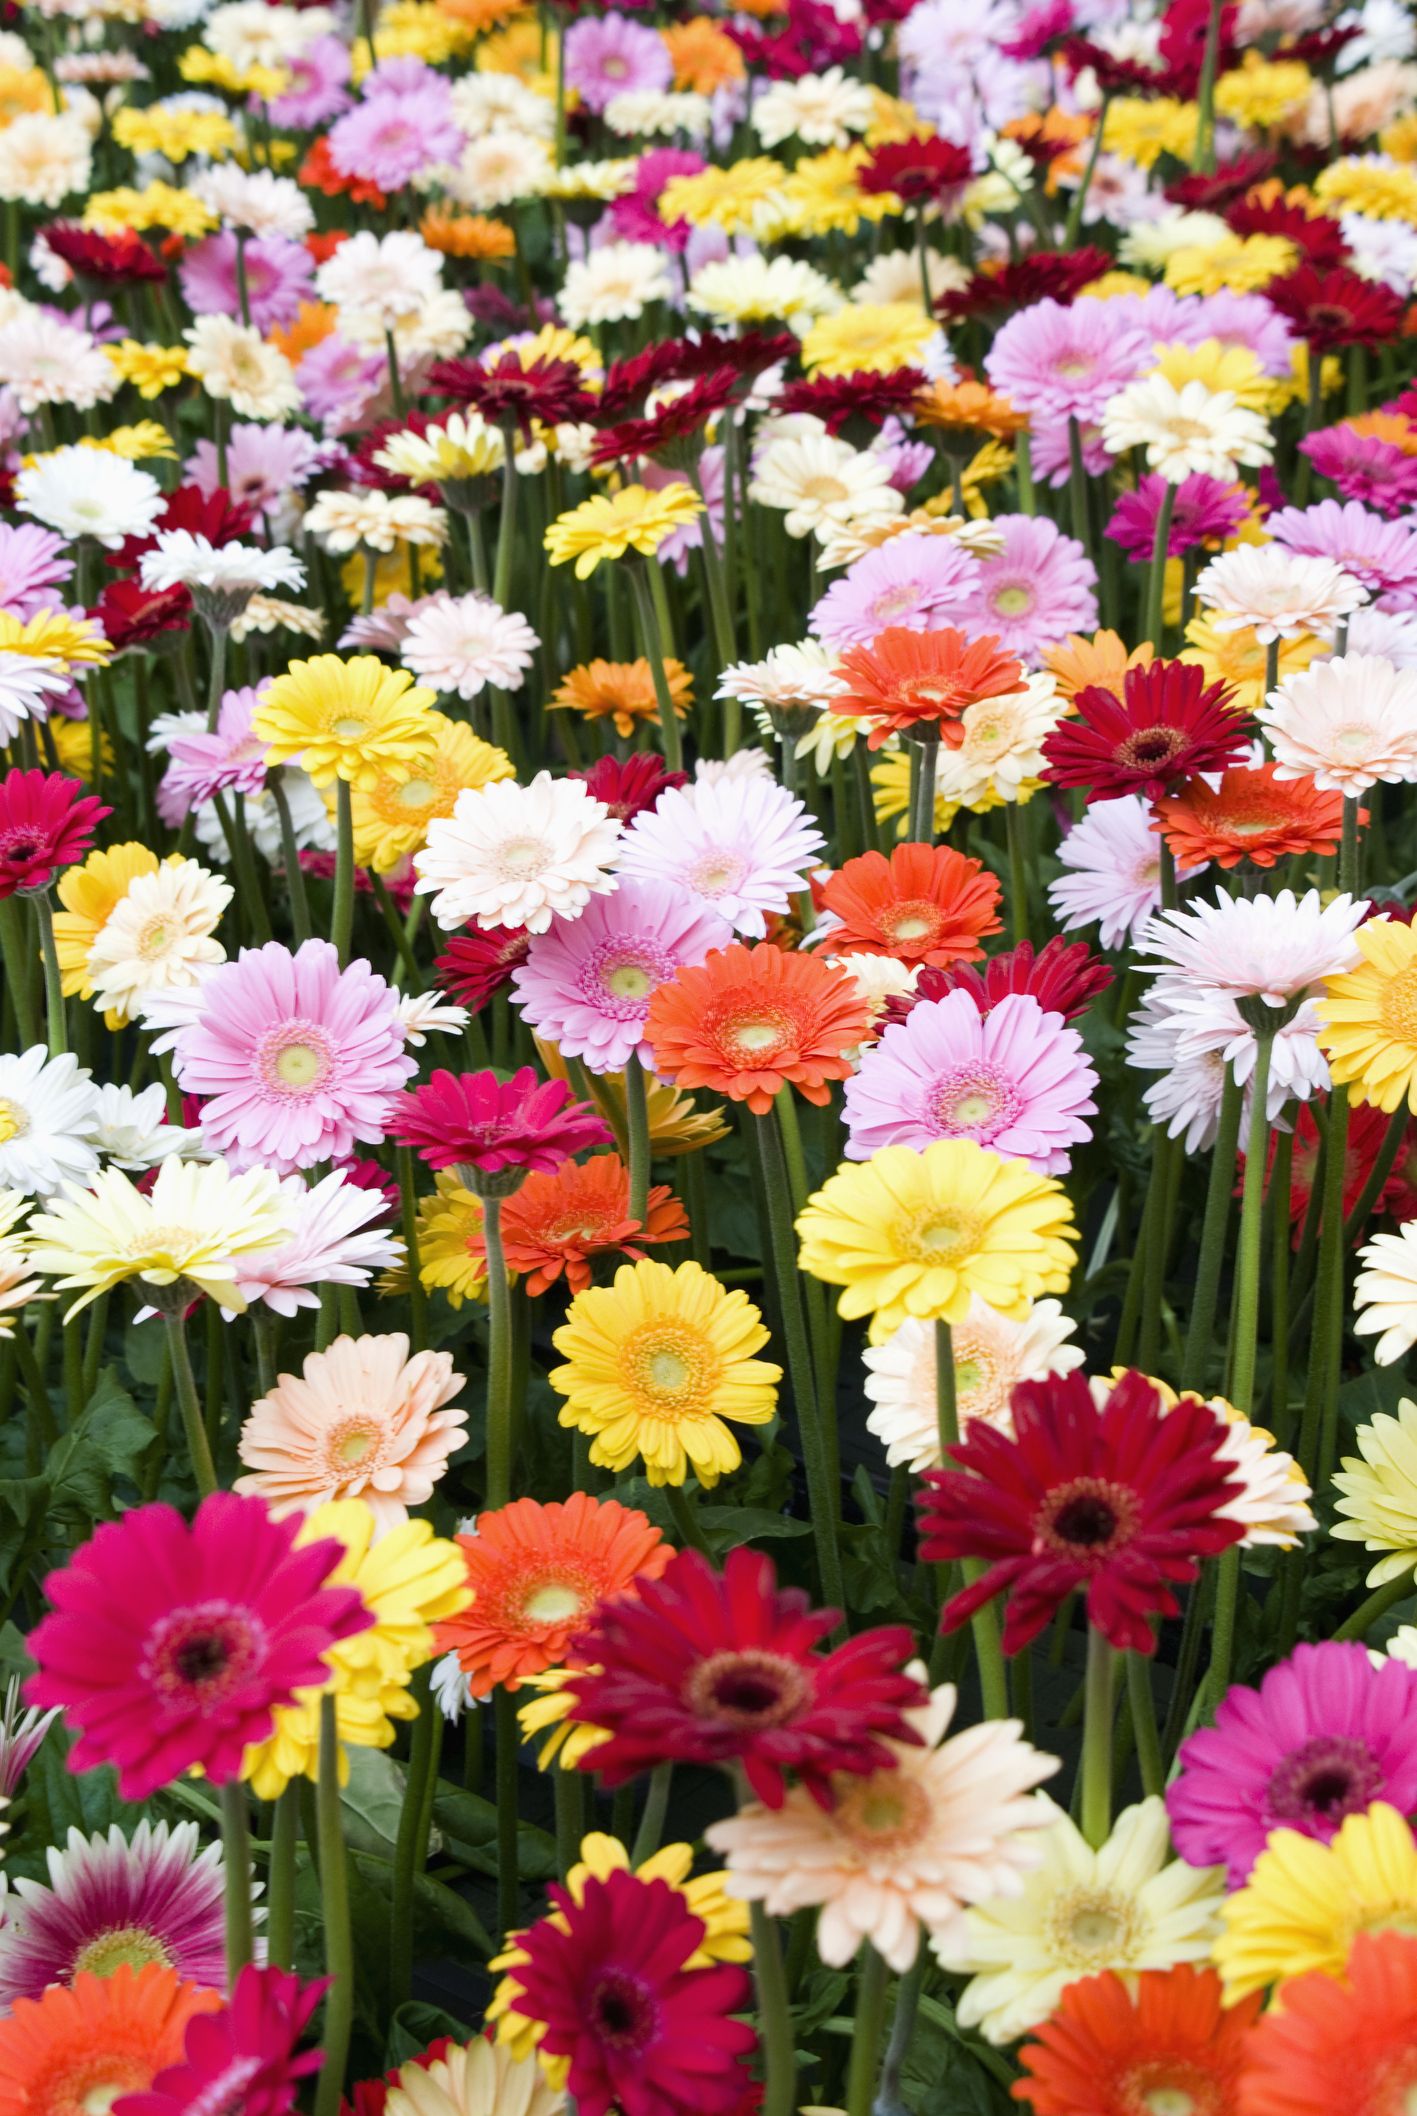 25 Colorful Types Of Daisies Daisy Varieties For Your Garden,Turkey Legs Disney